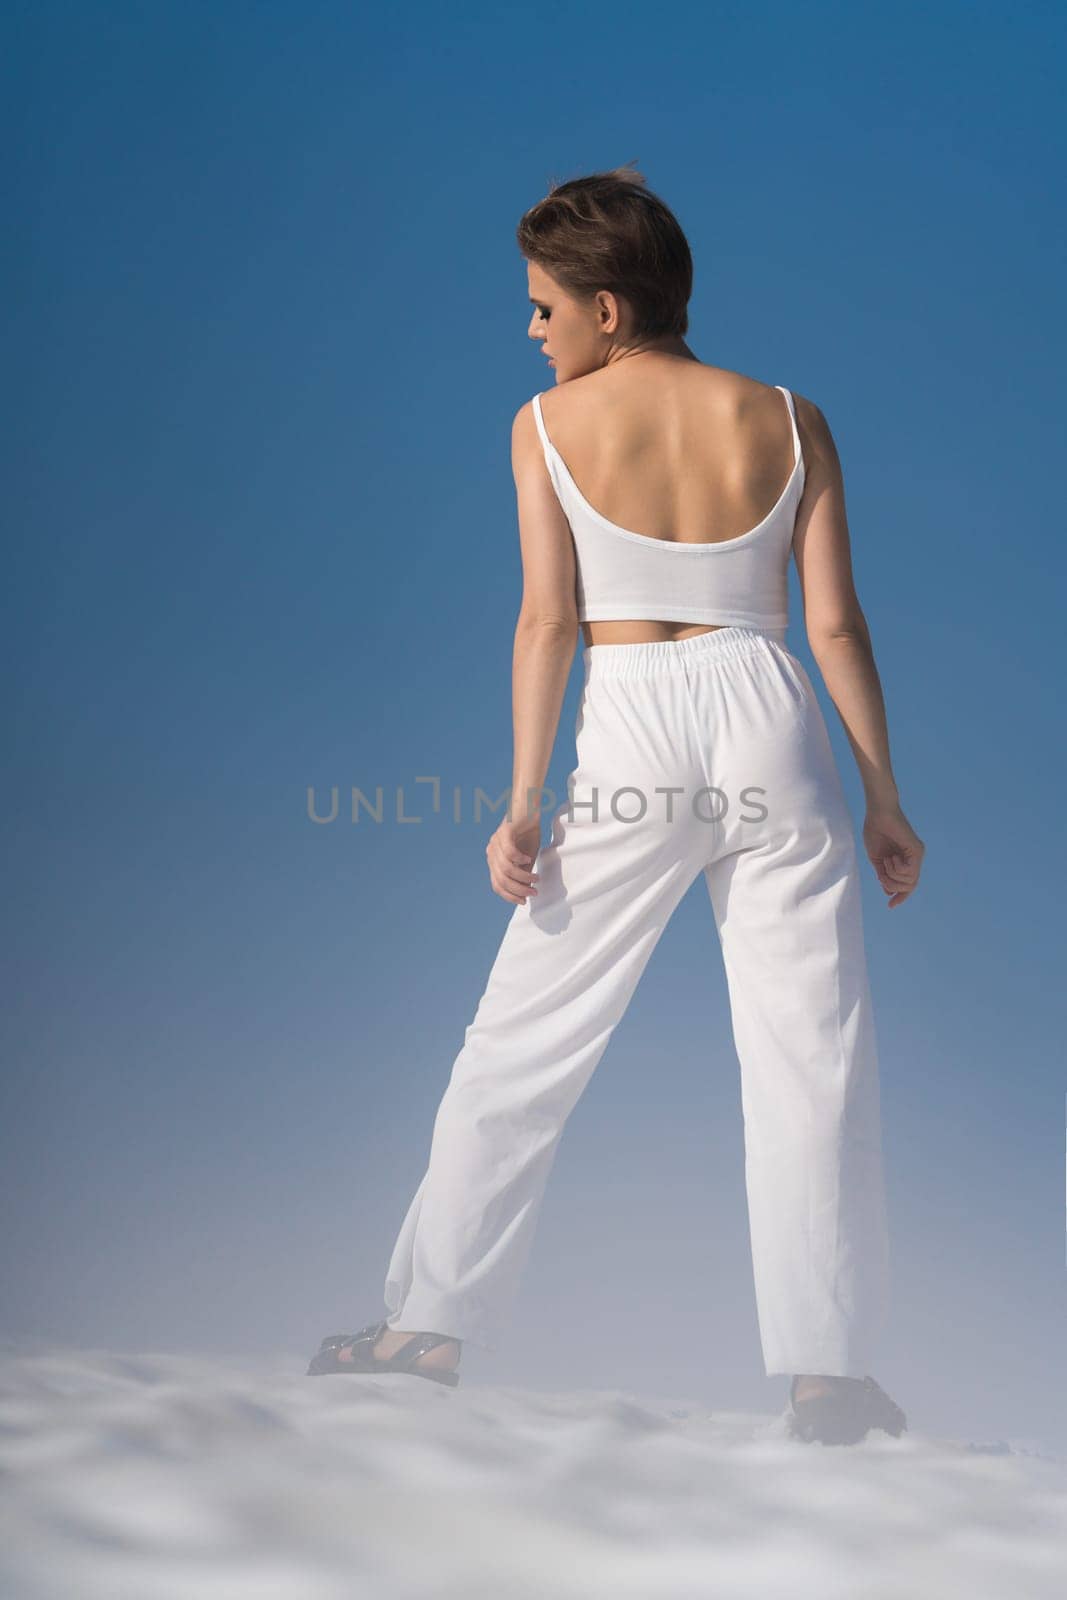 Rear view of fashionable woman posing through snow with light fog on sunny day with blue sky. Playful blond fashion model wearing in white cropped top and white pants, sandals. Full length